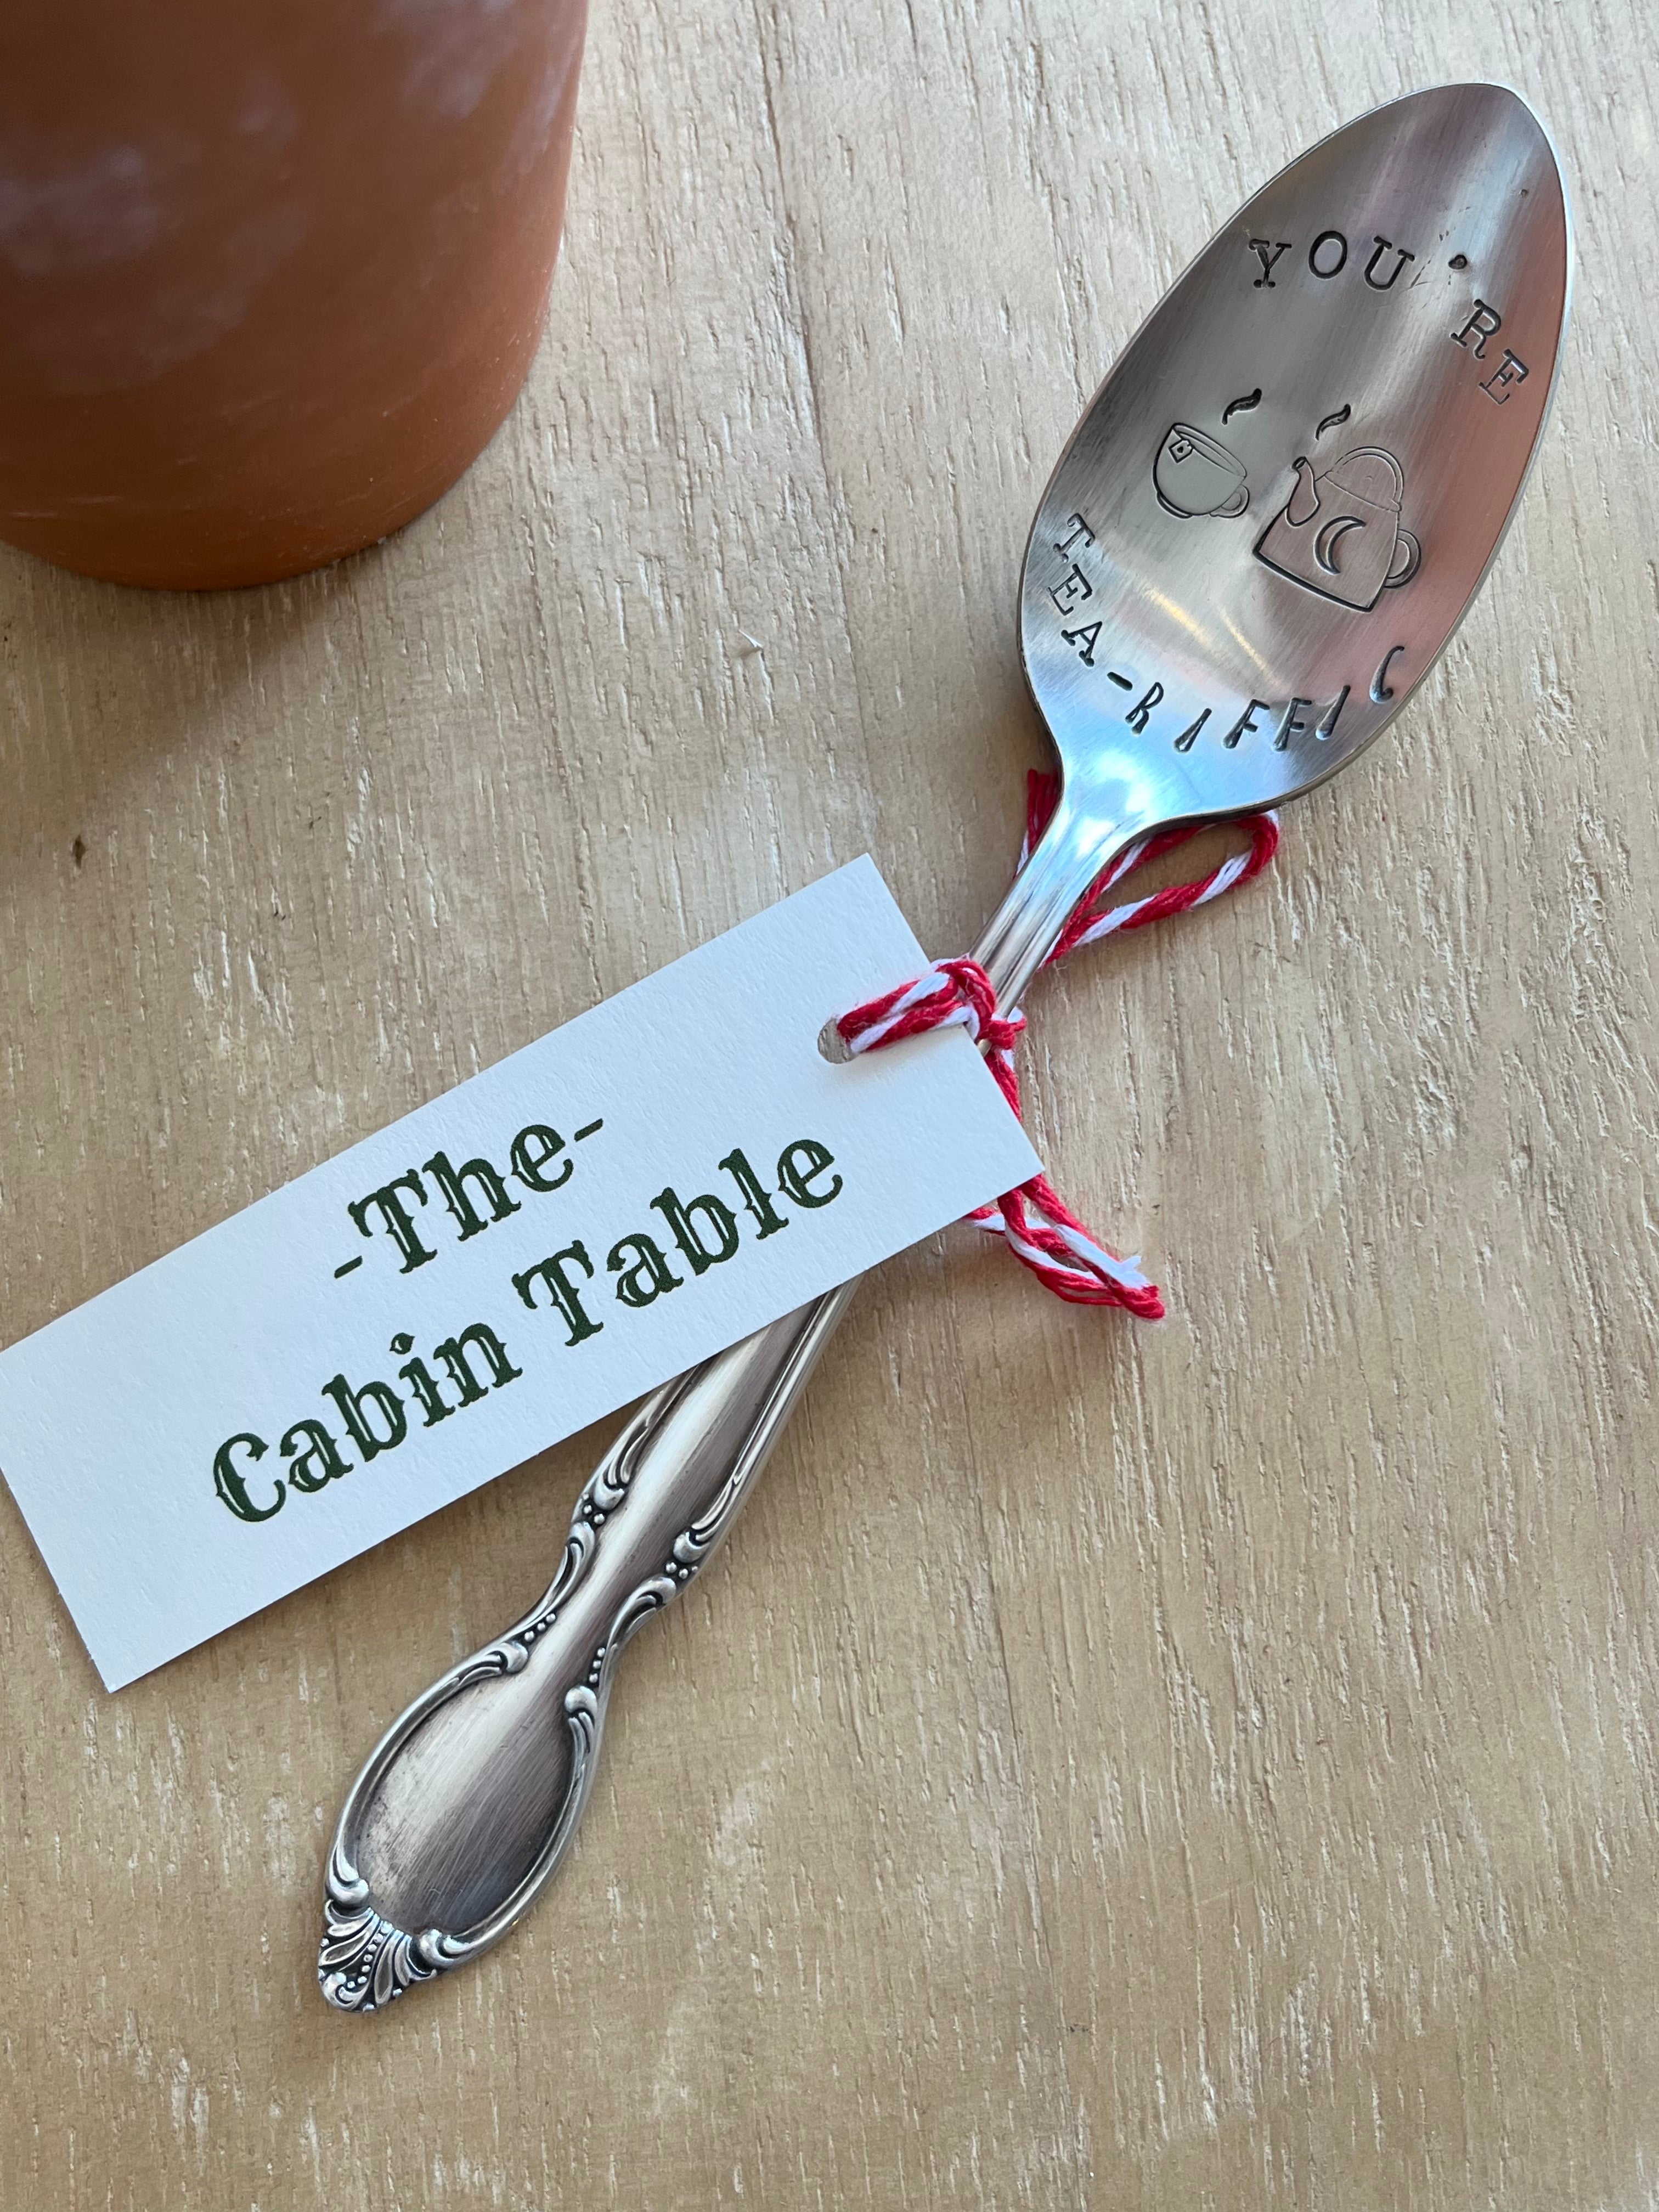 You're Tea-riffic - Stamped Spoons from the Cabin Table